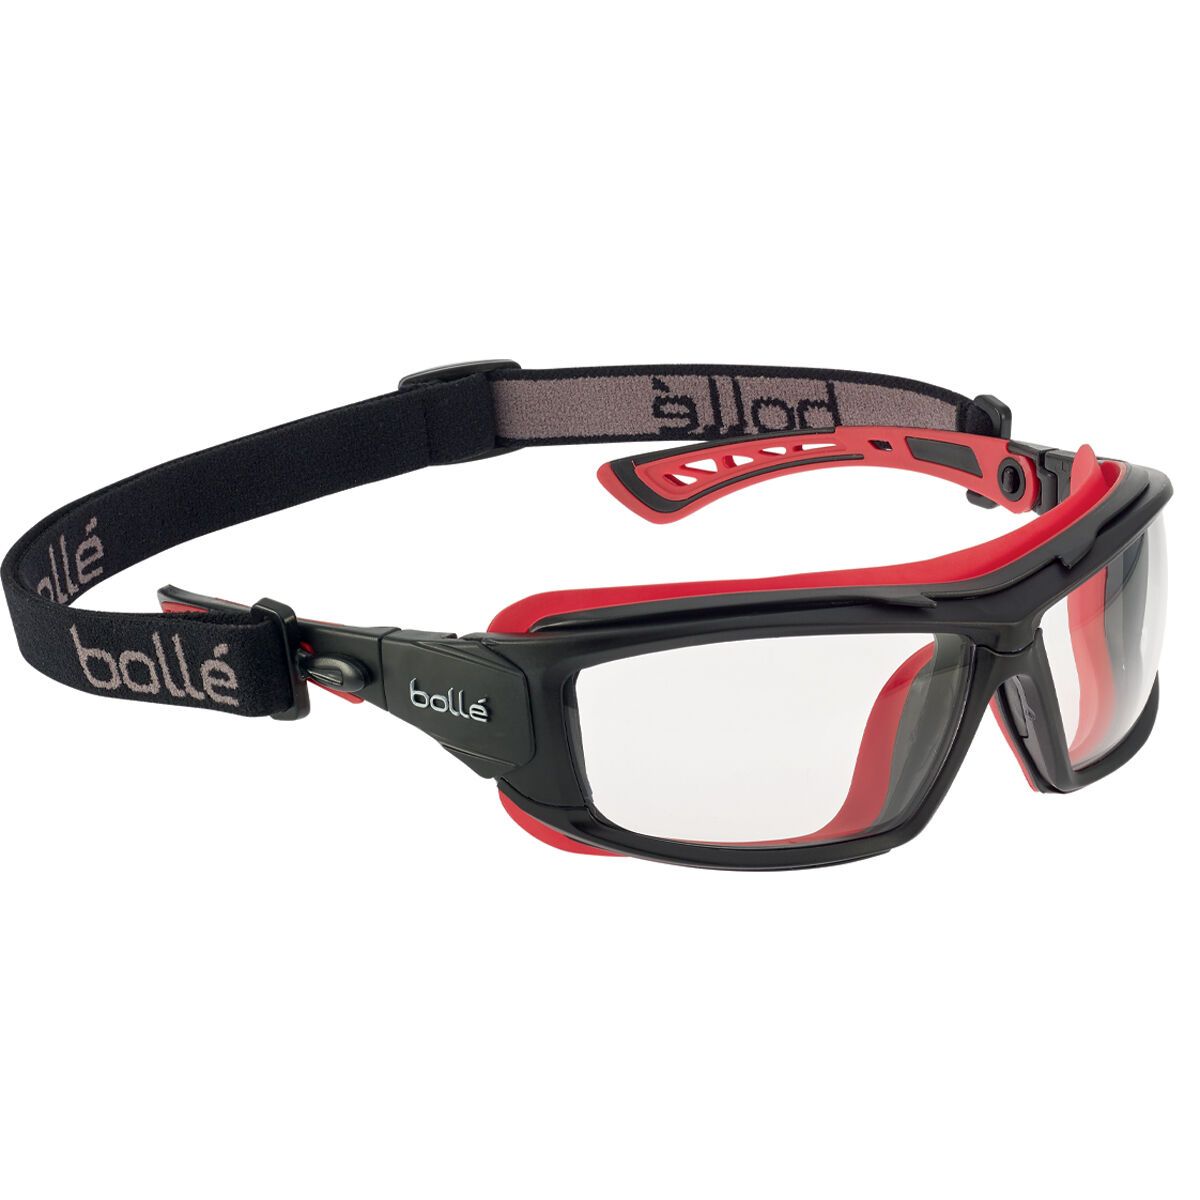 Bolle Safety Glasses Spectacles & Goggles TWO in One RUSH TRACKER BAXTER ULTIM8 